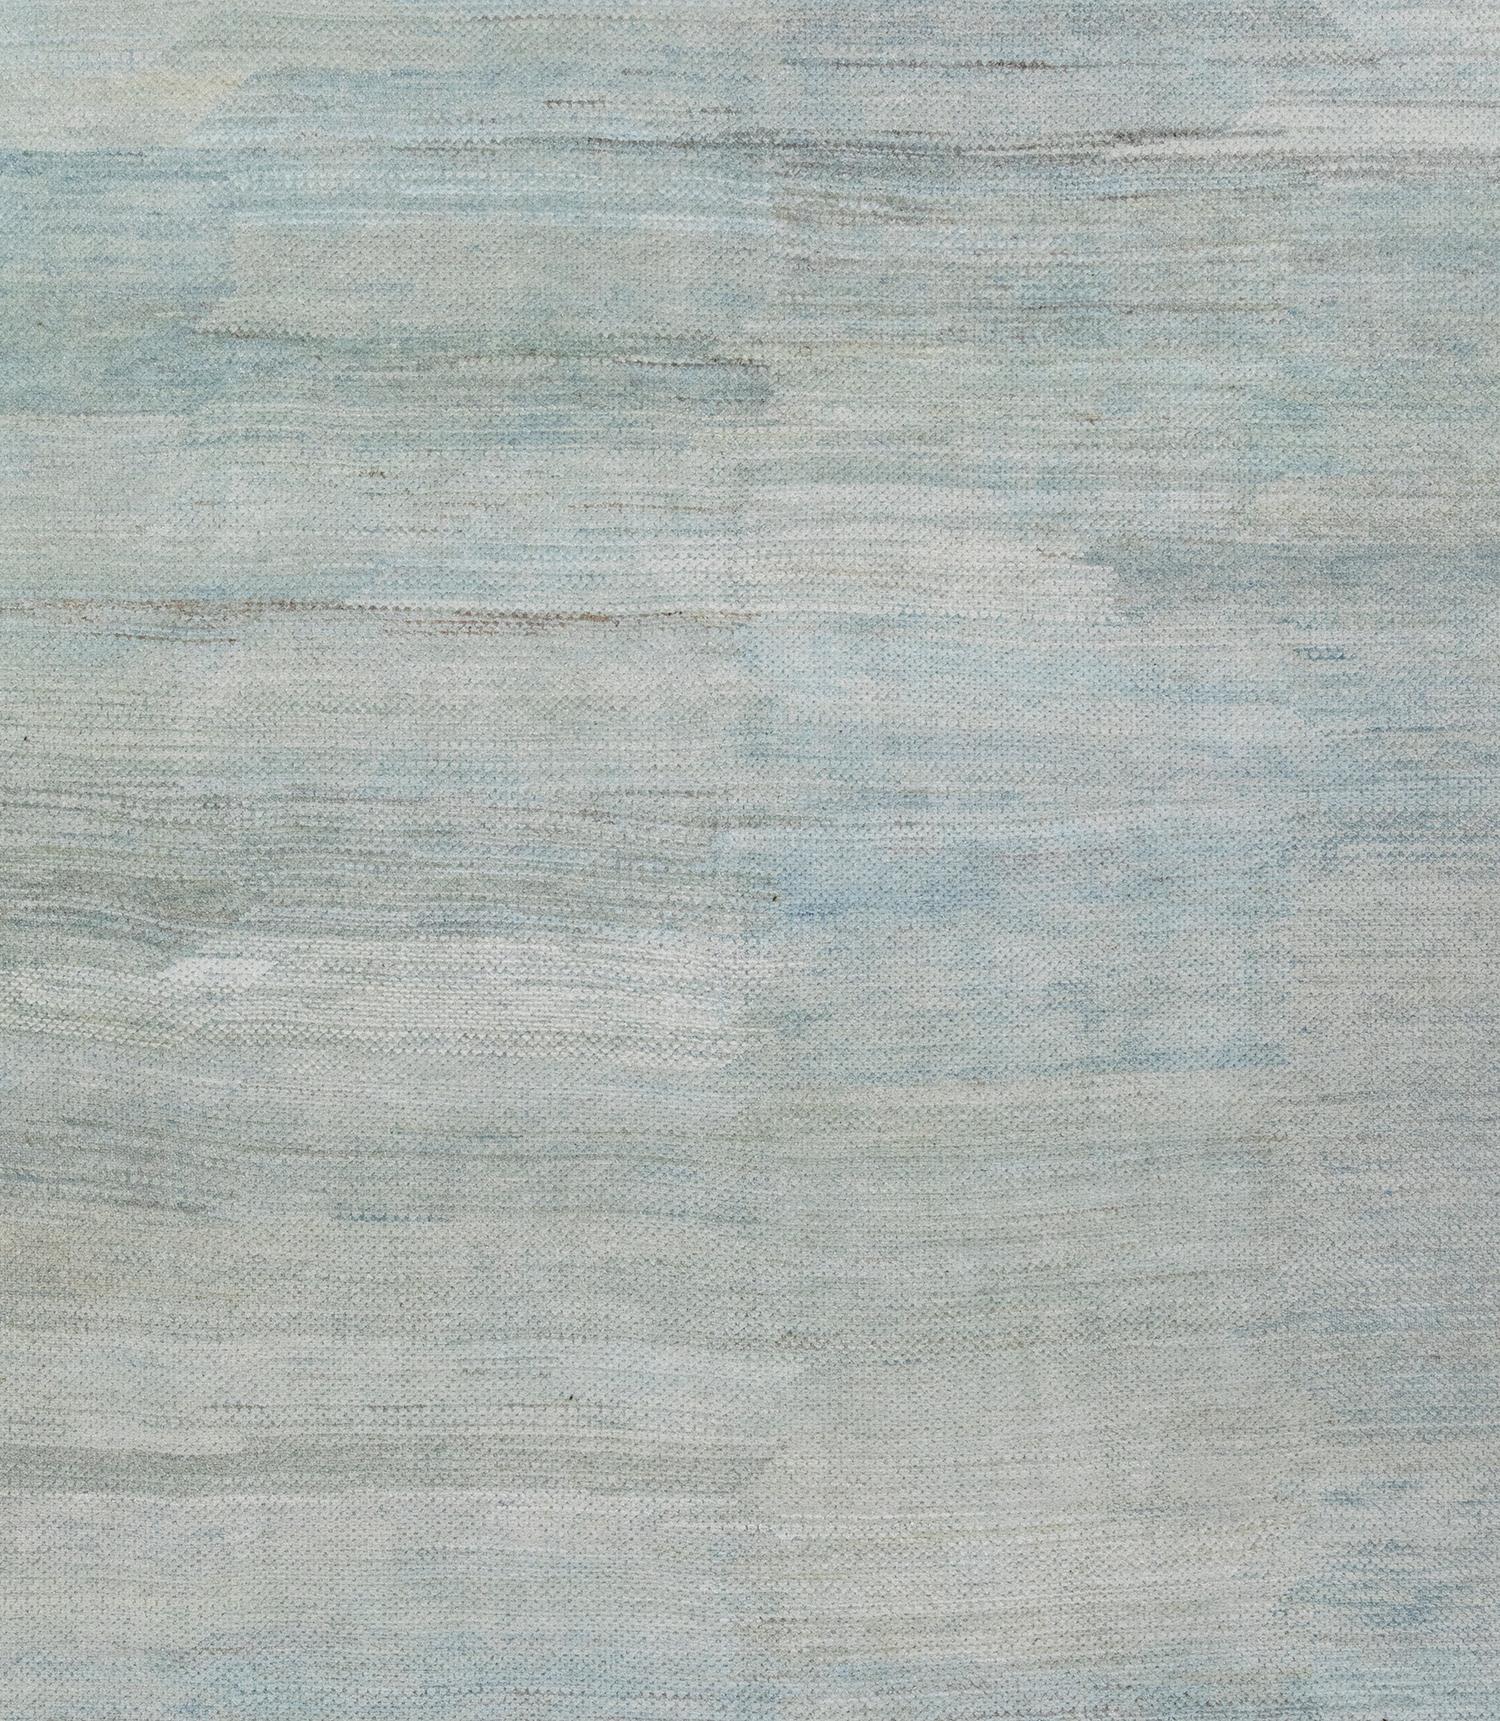 This is a beautiful modern rug featuring a blue/green abrash paint brush style. It has a great deal of texture as it has a subtle relief design throughout. This piece is extremely versatile making it suitable for both period and contemporary